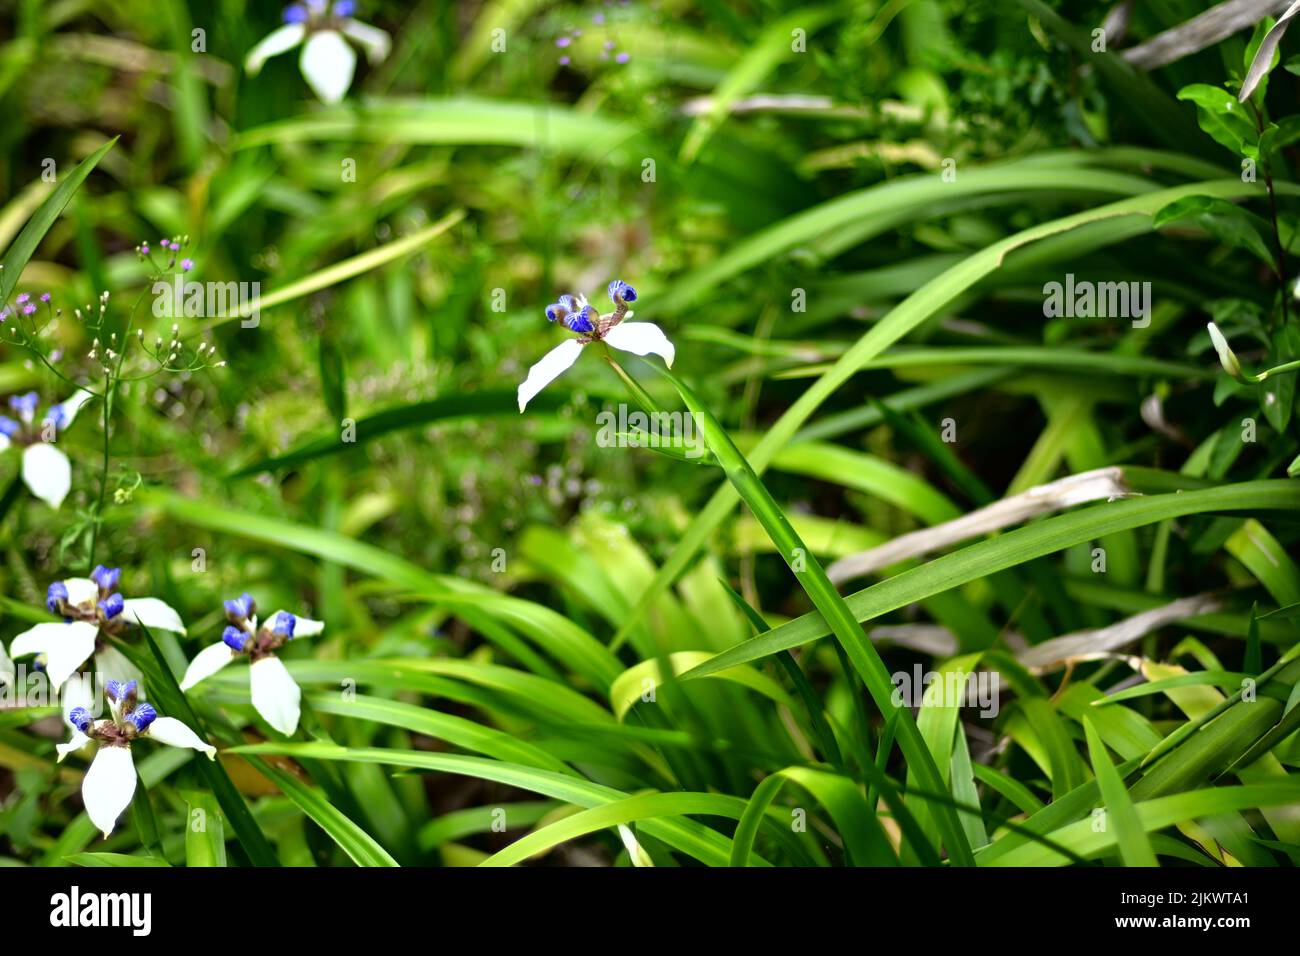 A patch of walking iris flowers growing at a park in Hong Kong Stock Photo